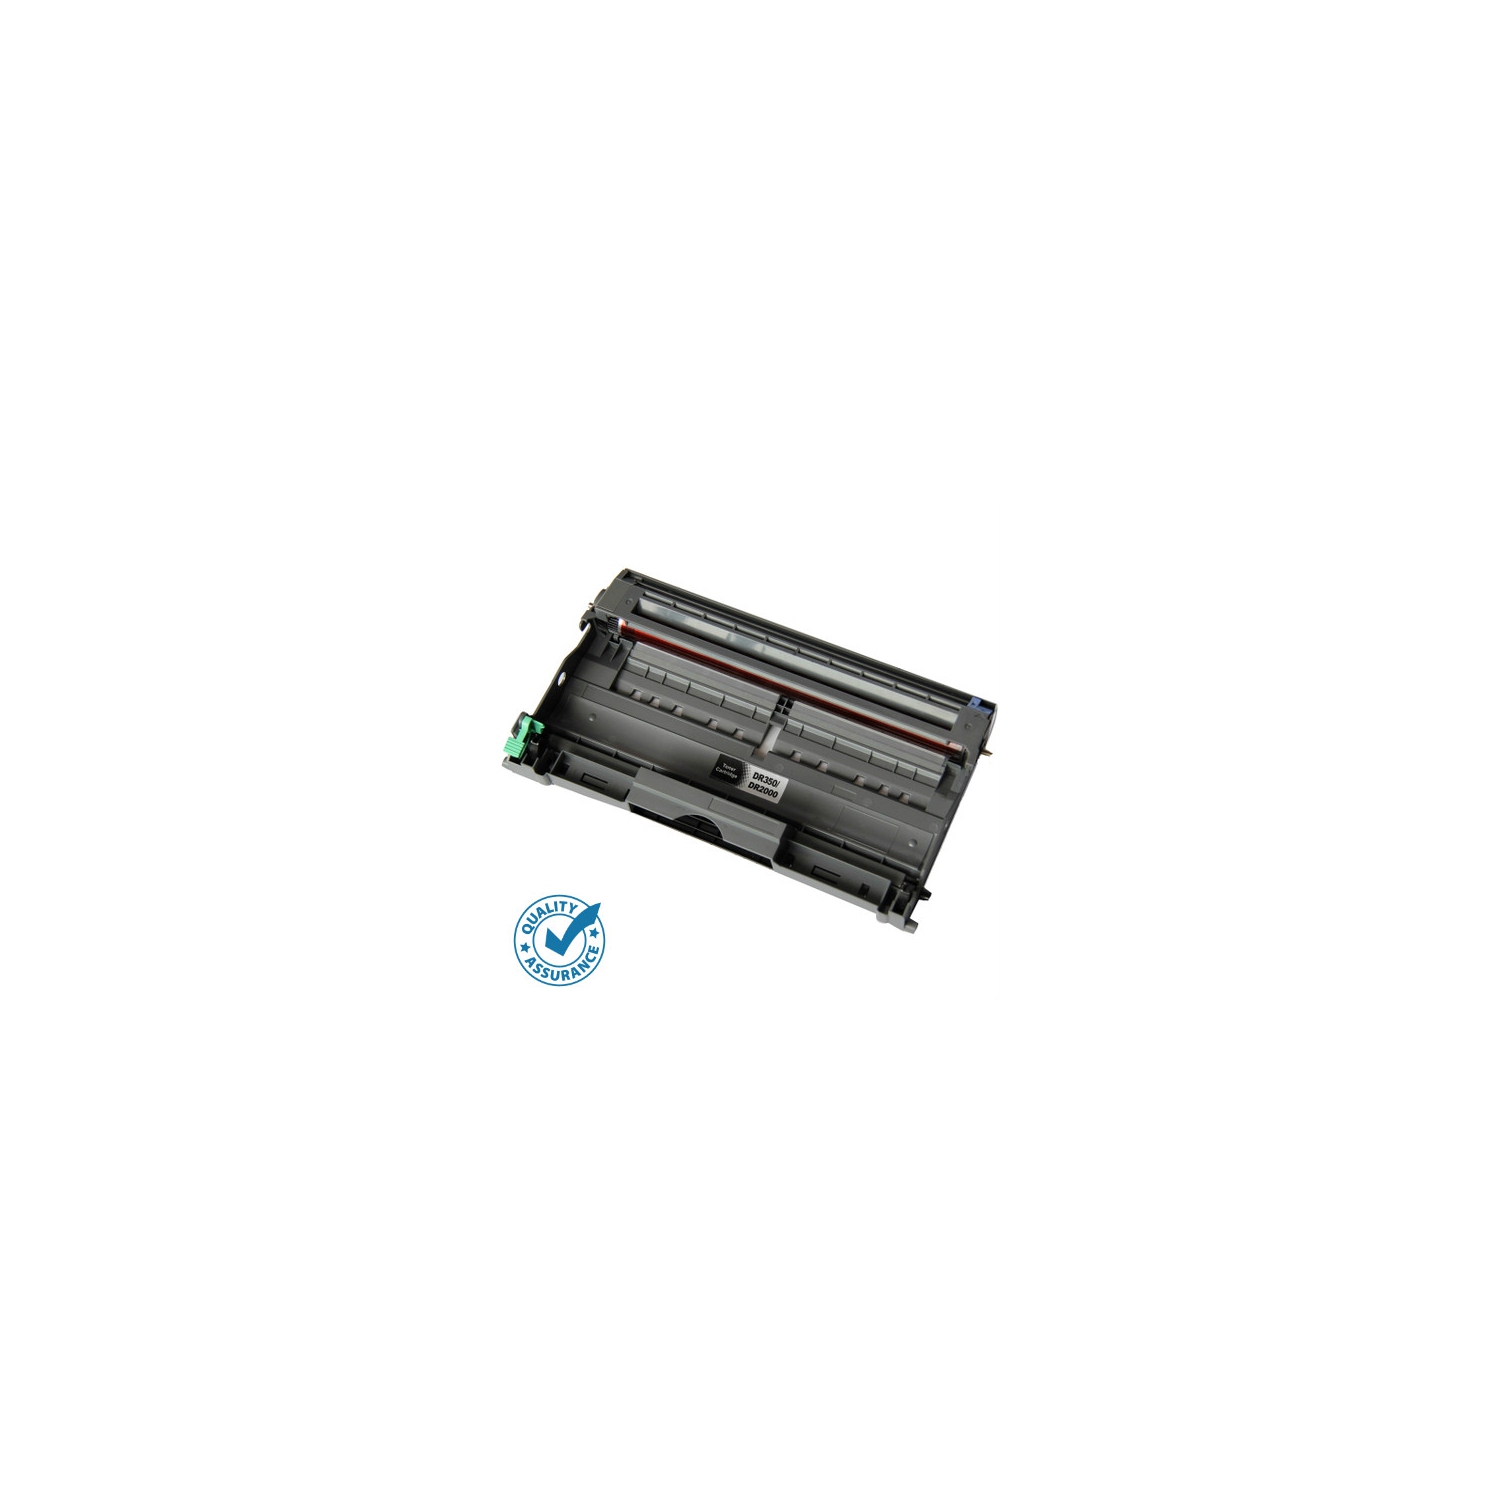 Printer Pro™ Brother DR350 (DR-350) Compatible Drum for TN350-Brother Printer DCP-7020/HL-2030/2070/7220/MFC-7420/7820